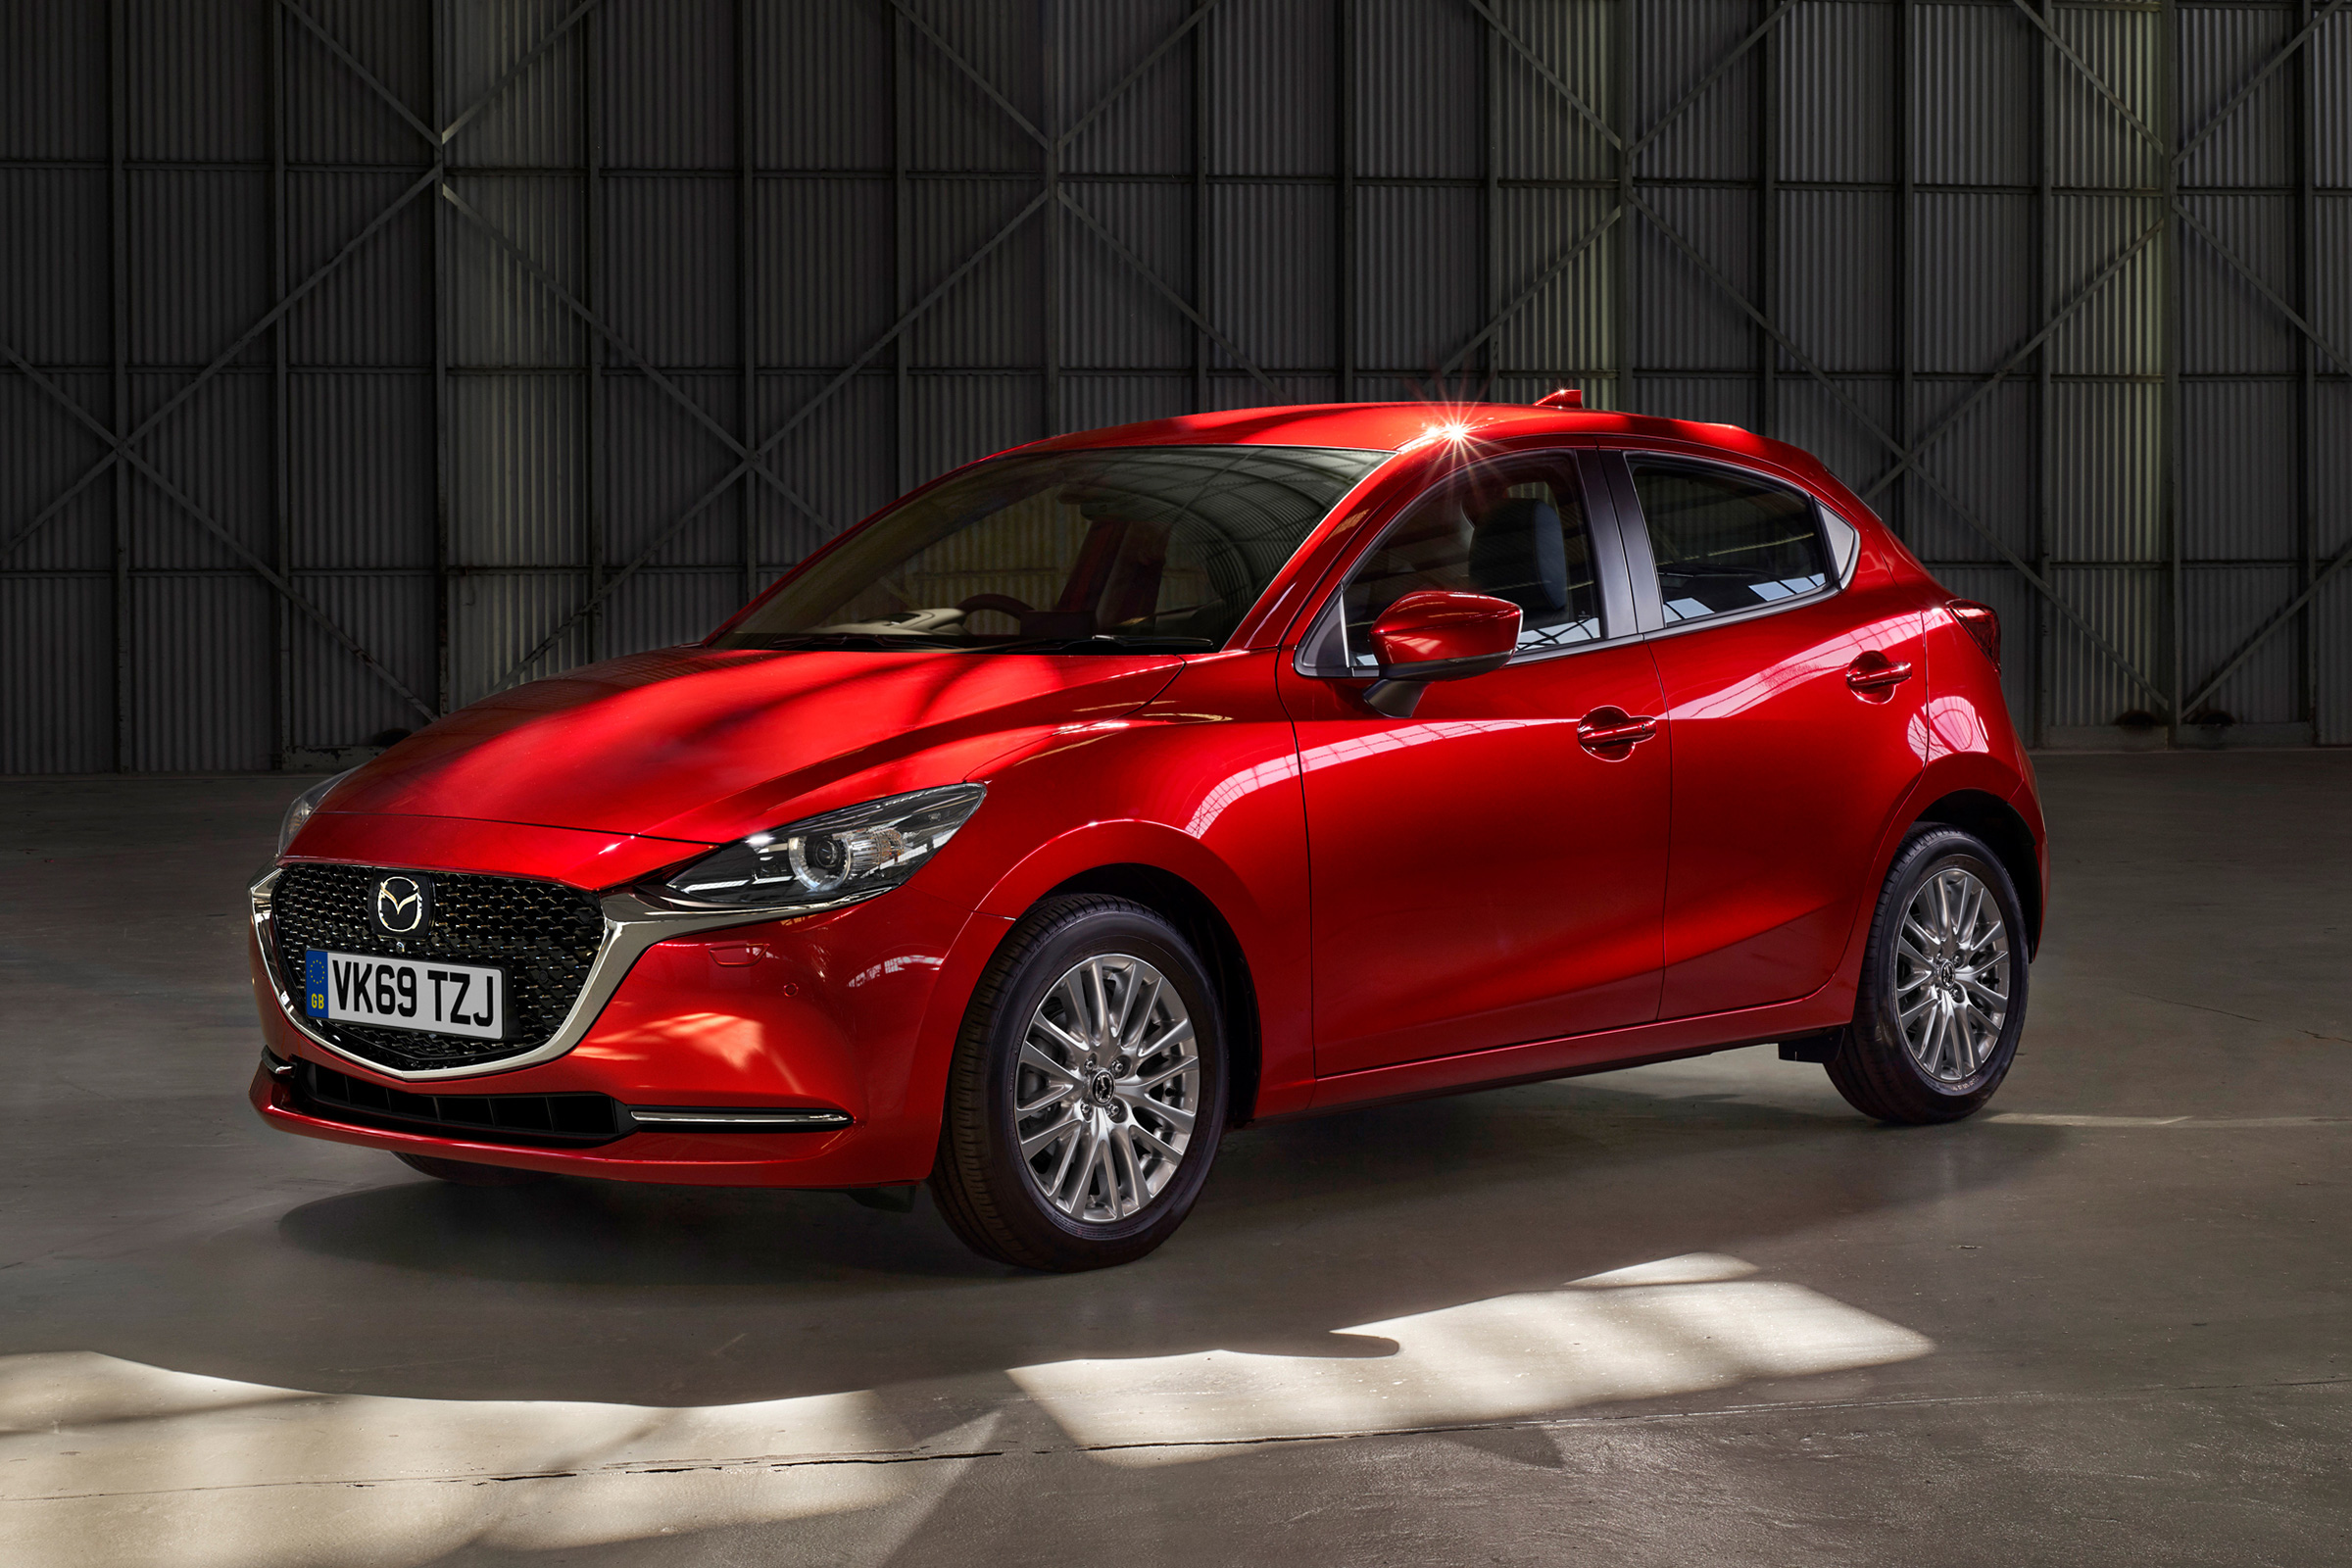 New 2020 Mazda 2: UK prices and specs revealed  Auto Express